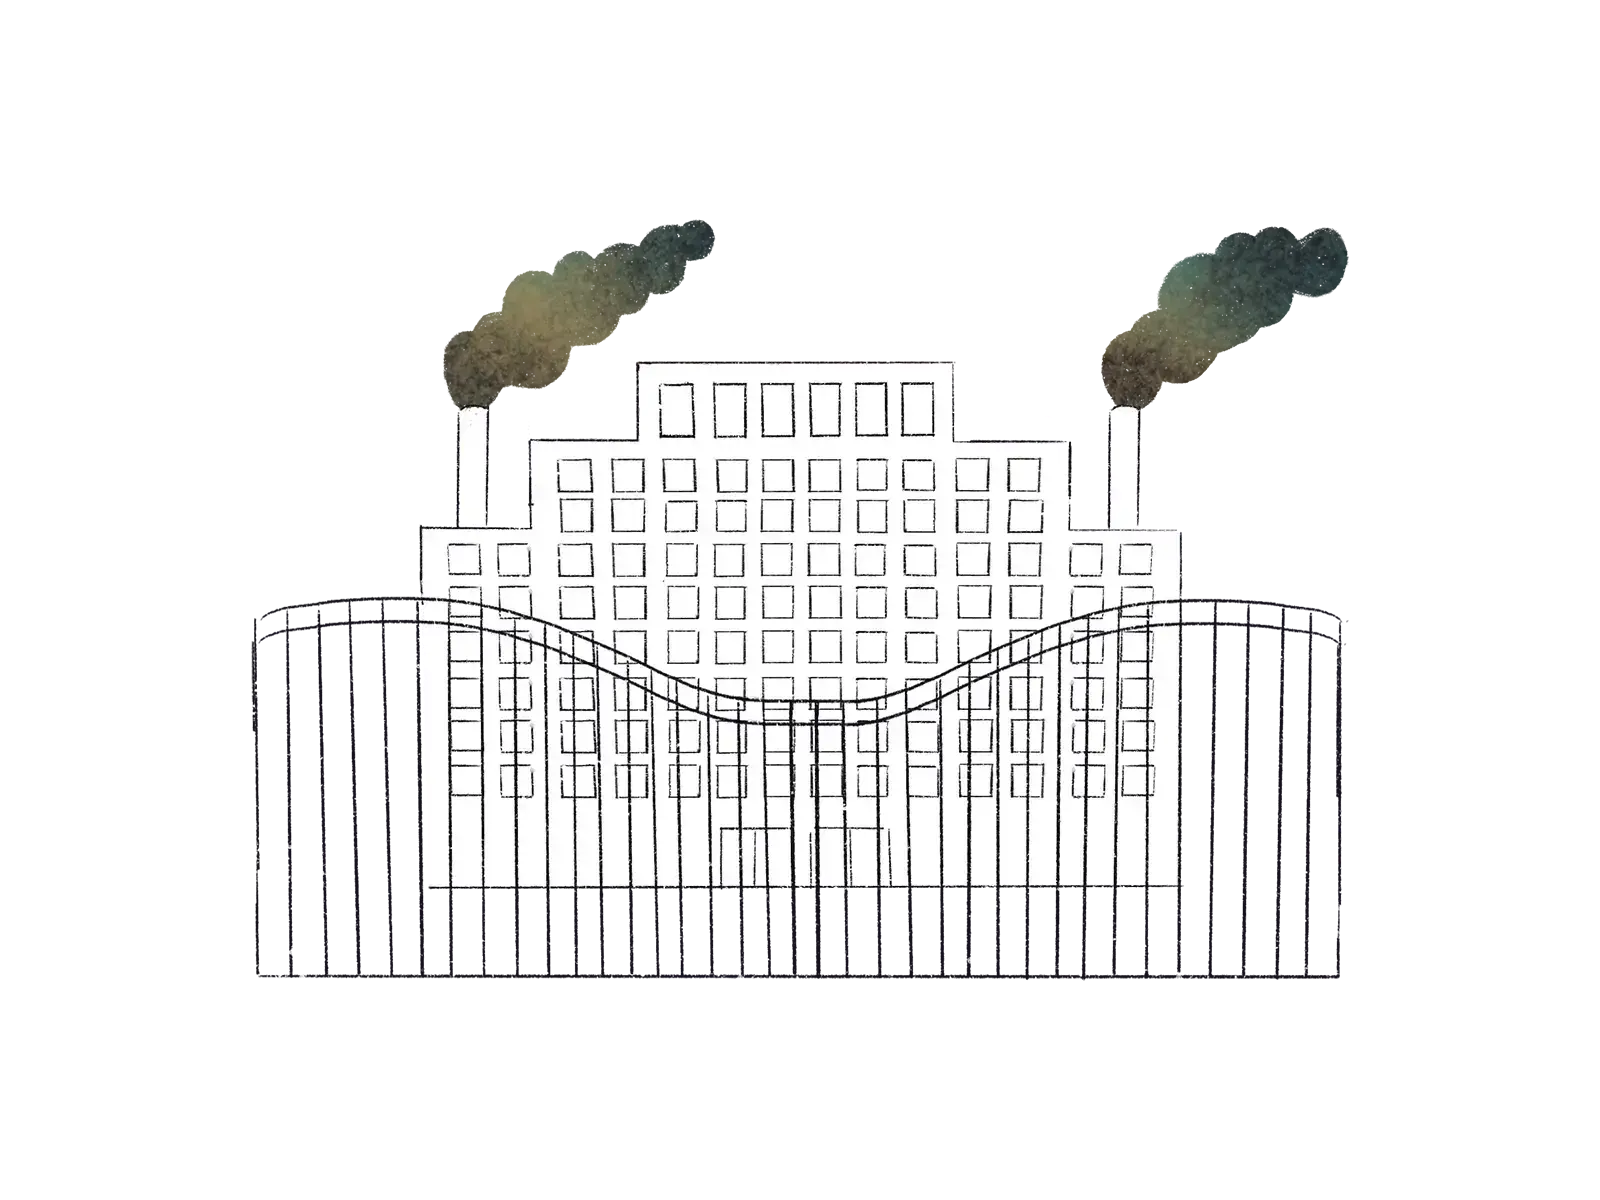 A polluted factory sits behinds large, imposing gates